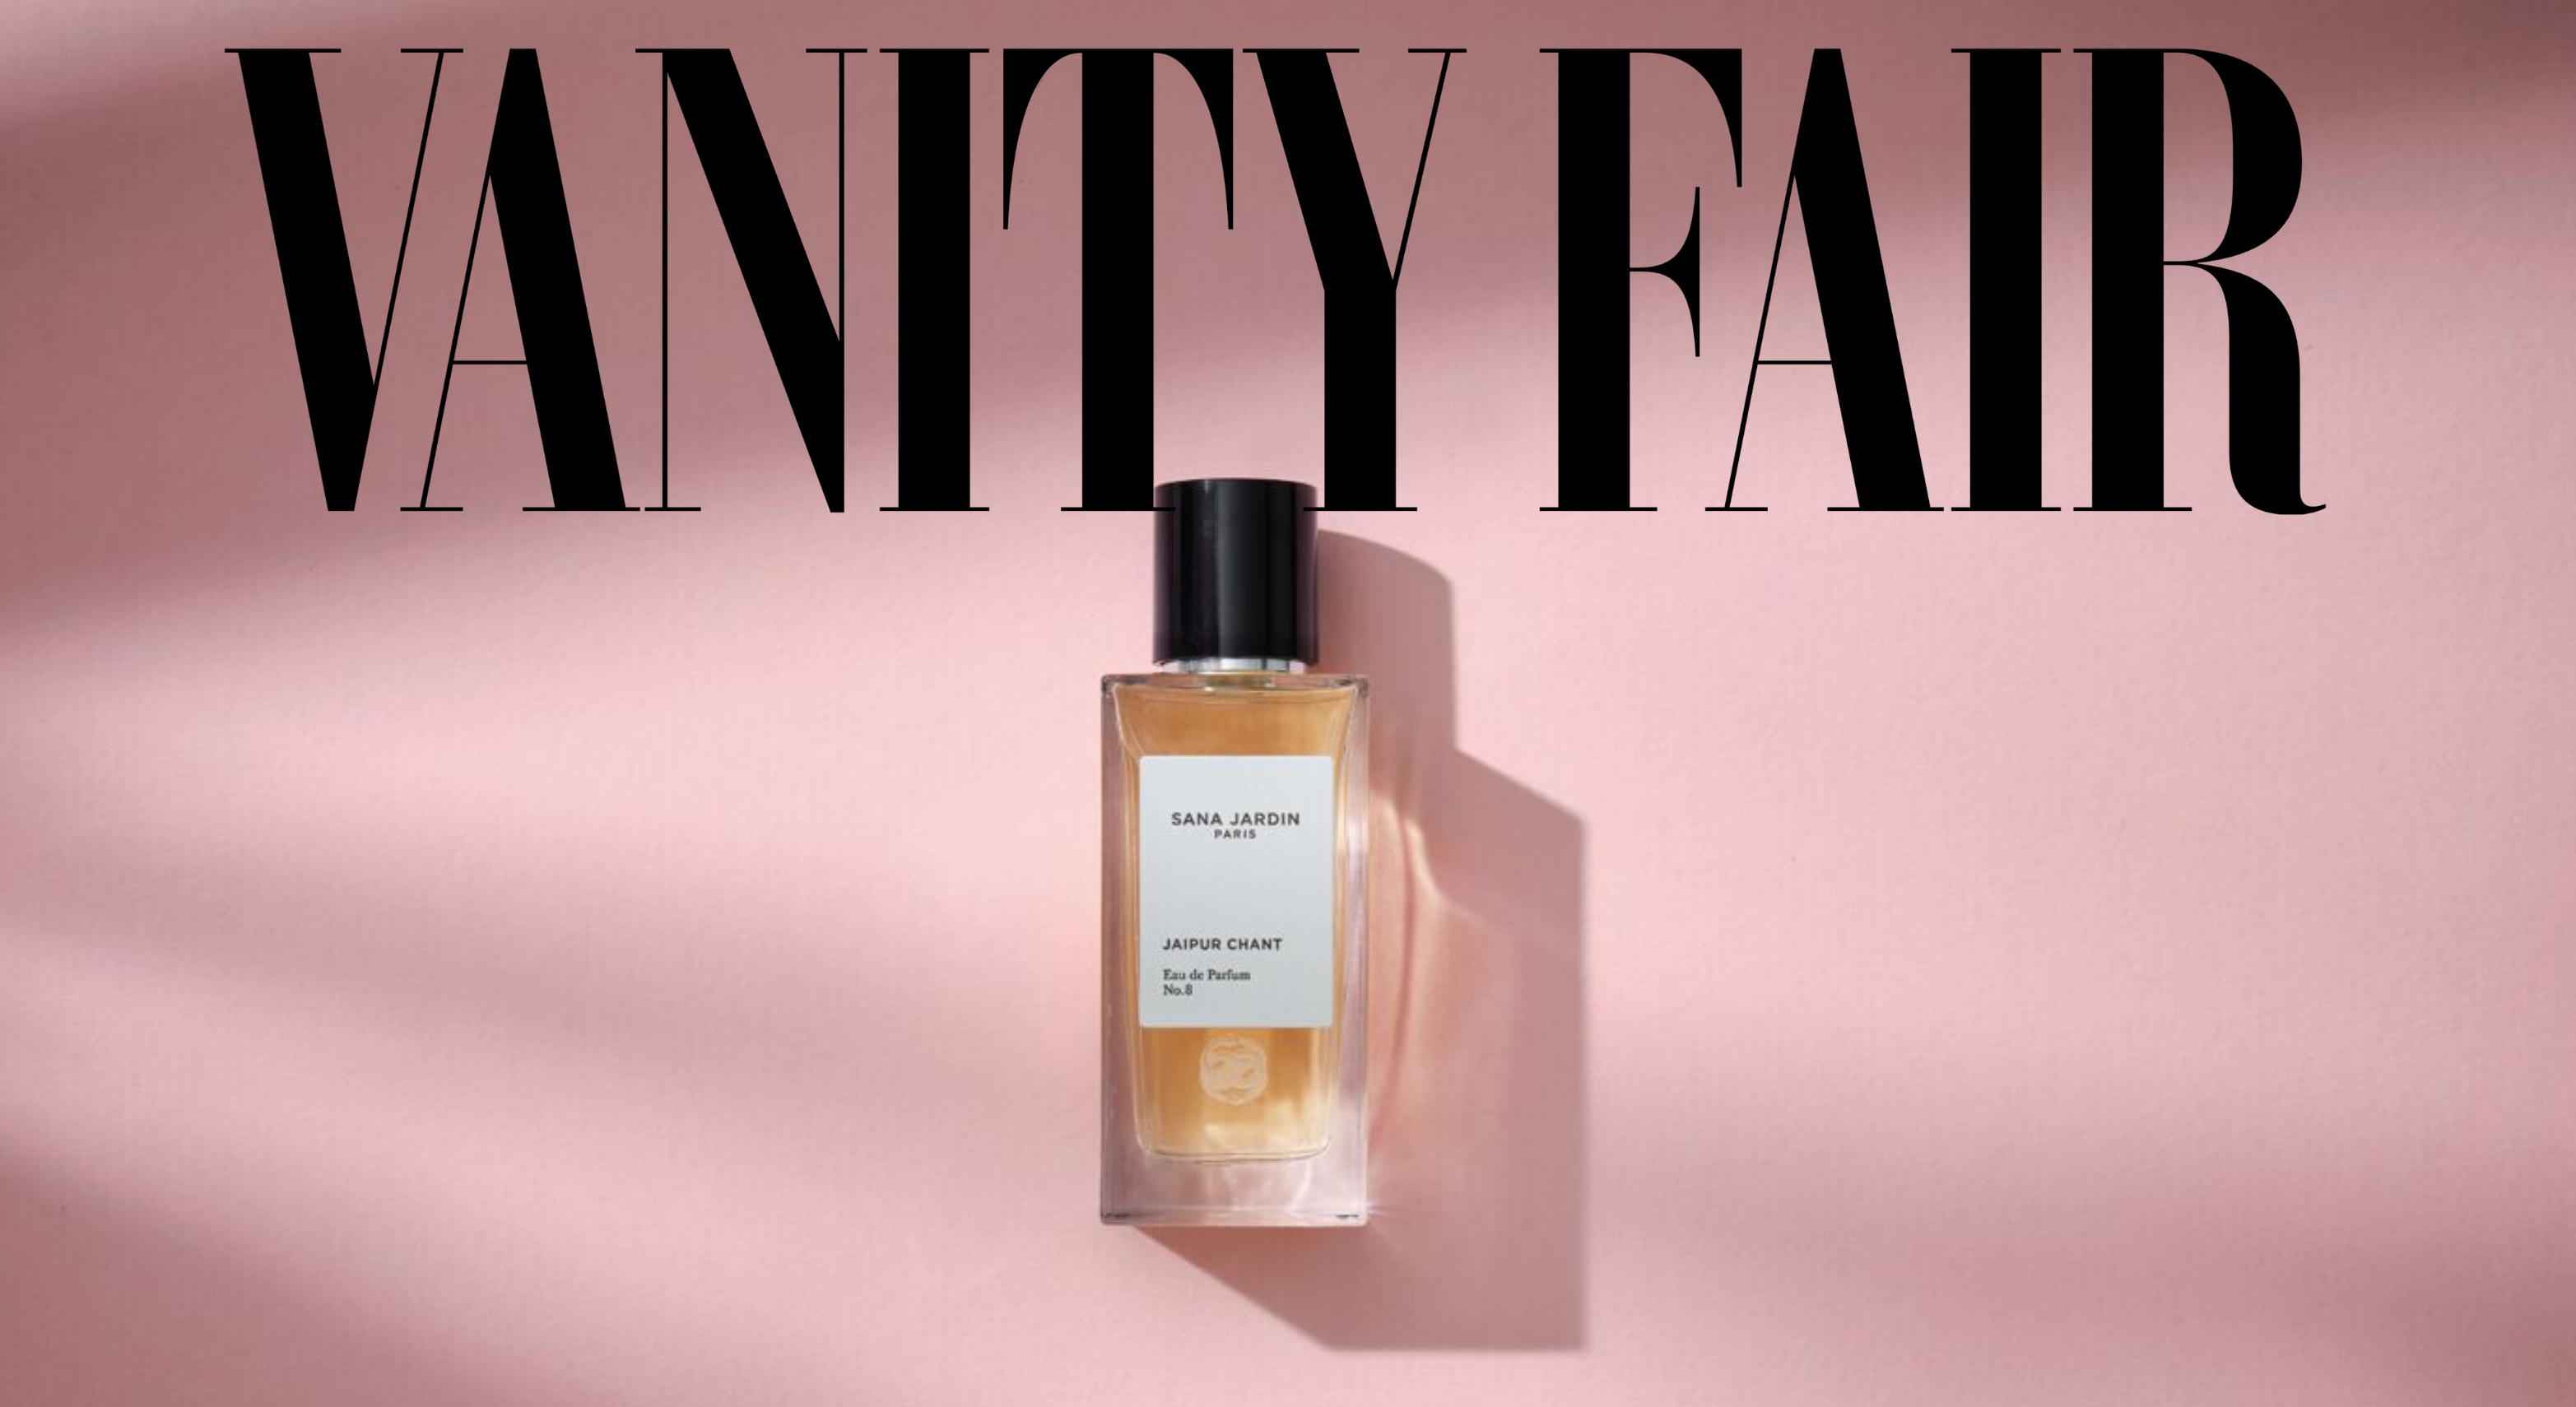 Vanity Fair: New Scents for Spring